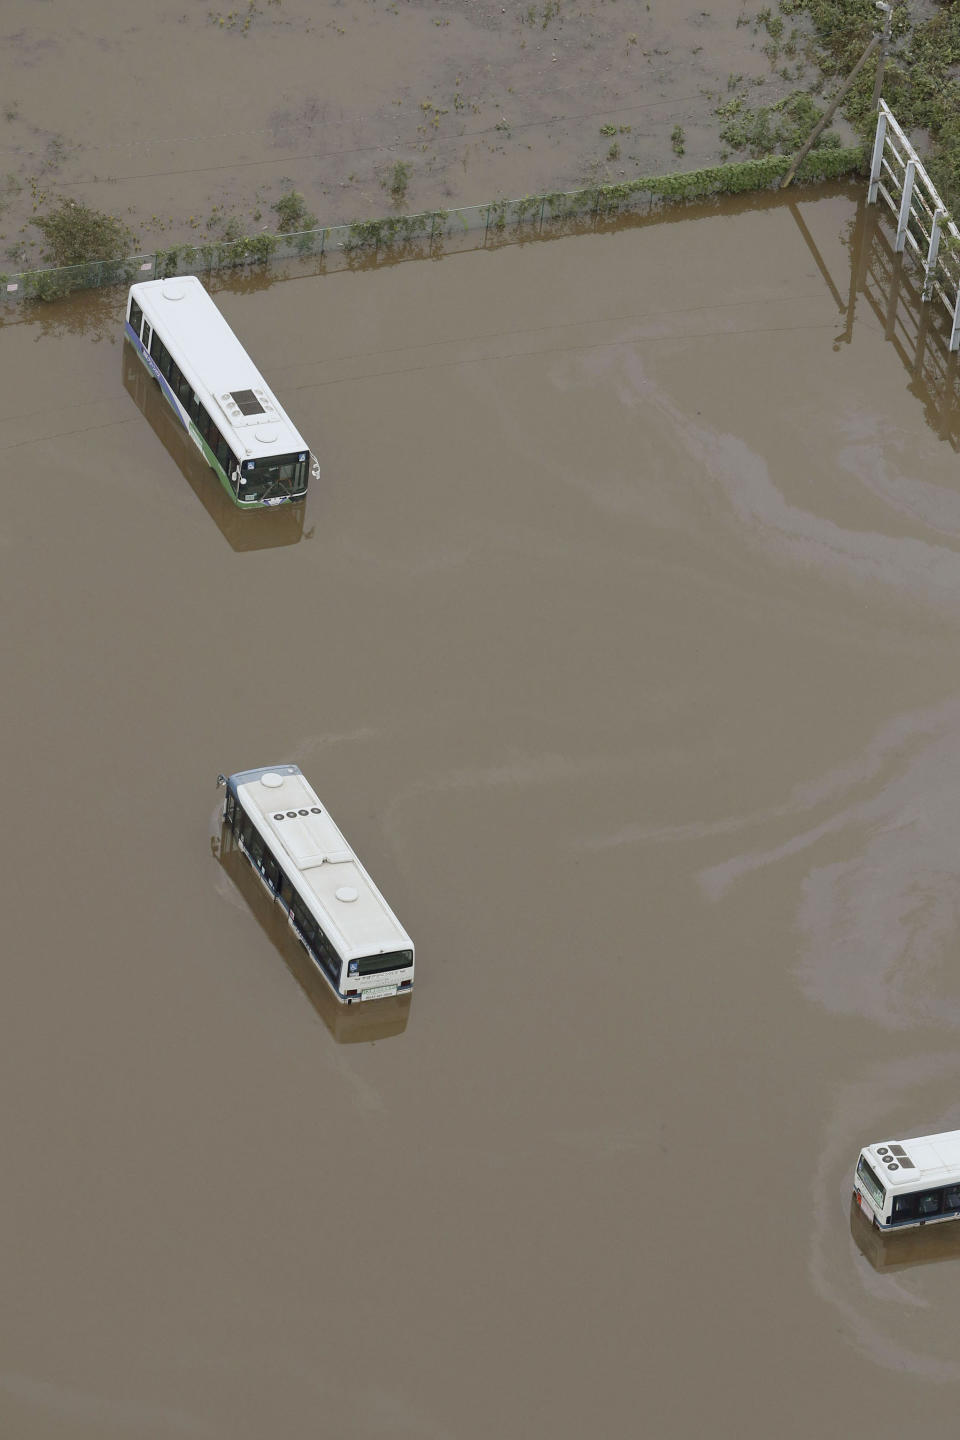 Busses are submerged in floodwaters after torrential rain in Sakura city, Chiba prefecture, east of Tokyo, Saturday, Oct. 26, 2019. Torrential rain that caused flooding and mudslides in towns east of Tokyo added damage in areas still recovering from recent typhoons. (Kyodo News via AP)